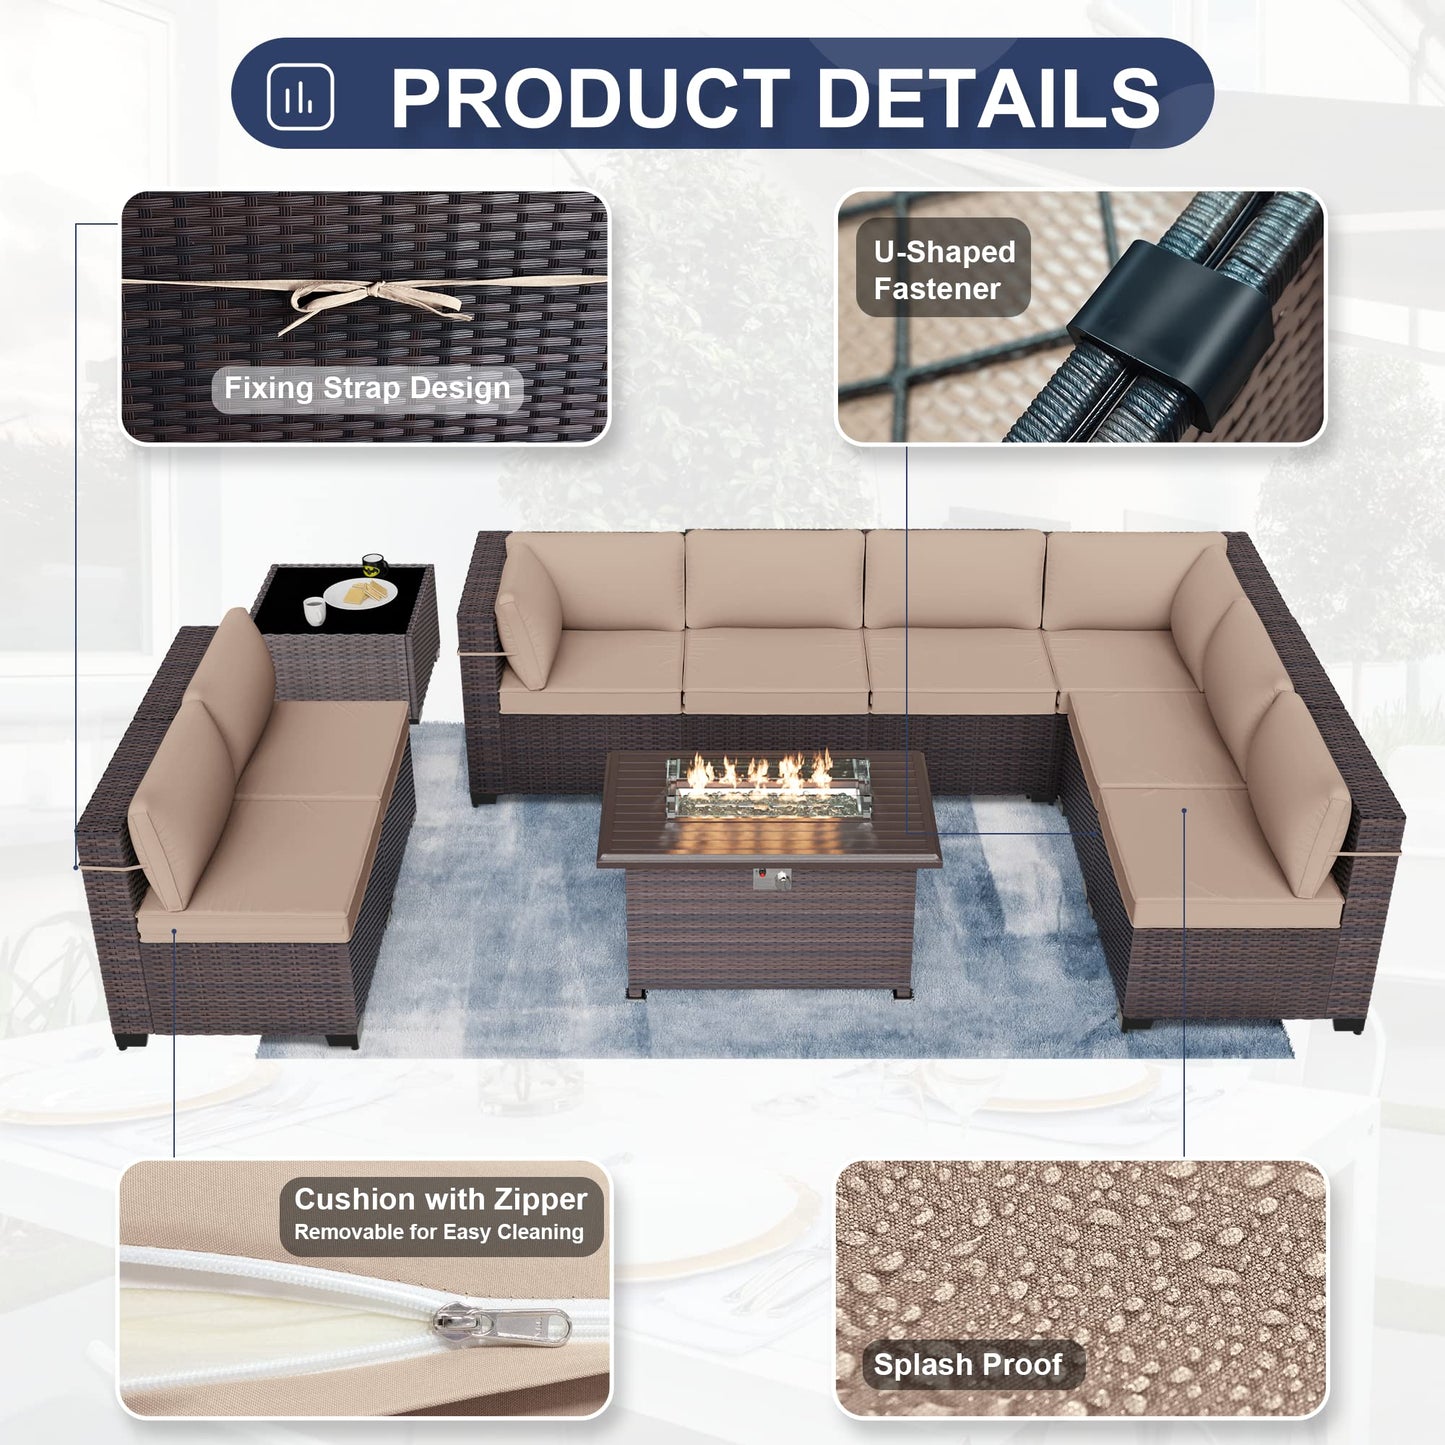 Delnavik Patio Furniture Sectional Sofa 10-Pieces PE Rattan Patio Conversation Set w/43in Gas Fire Pit Table, Outdoor Furniture with 55000 BTU Propane Fire Pit, Sand